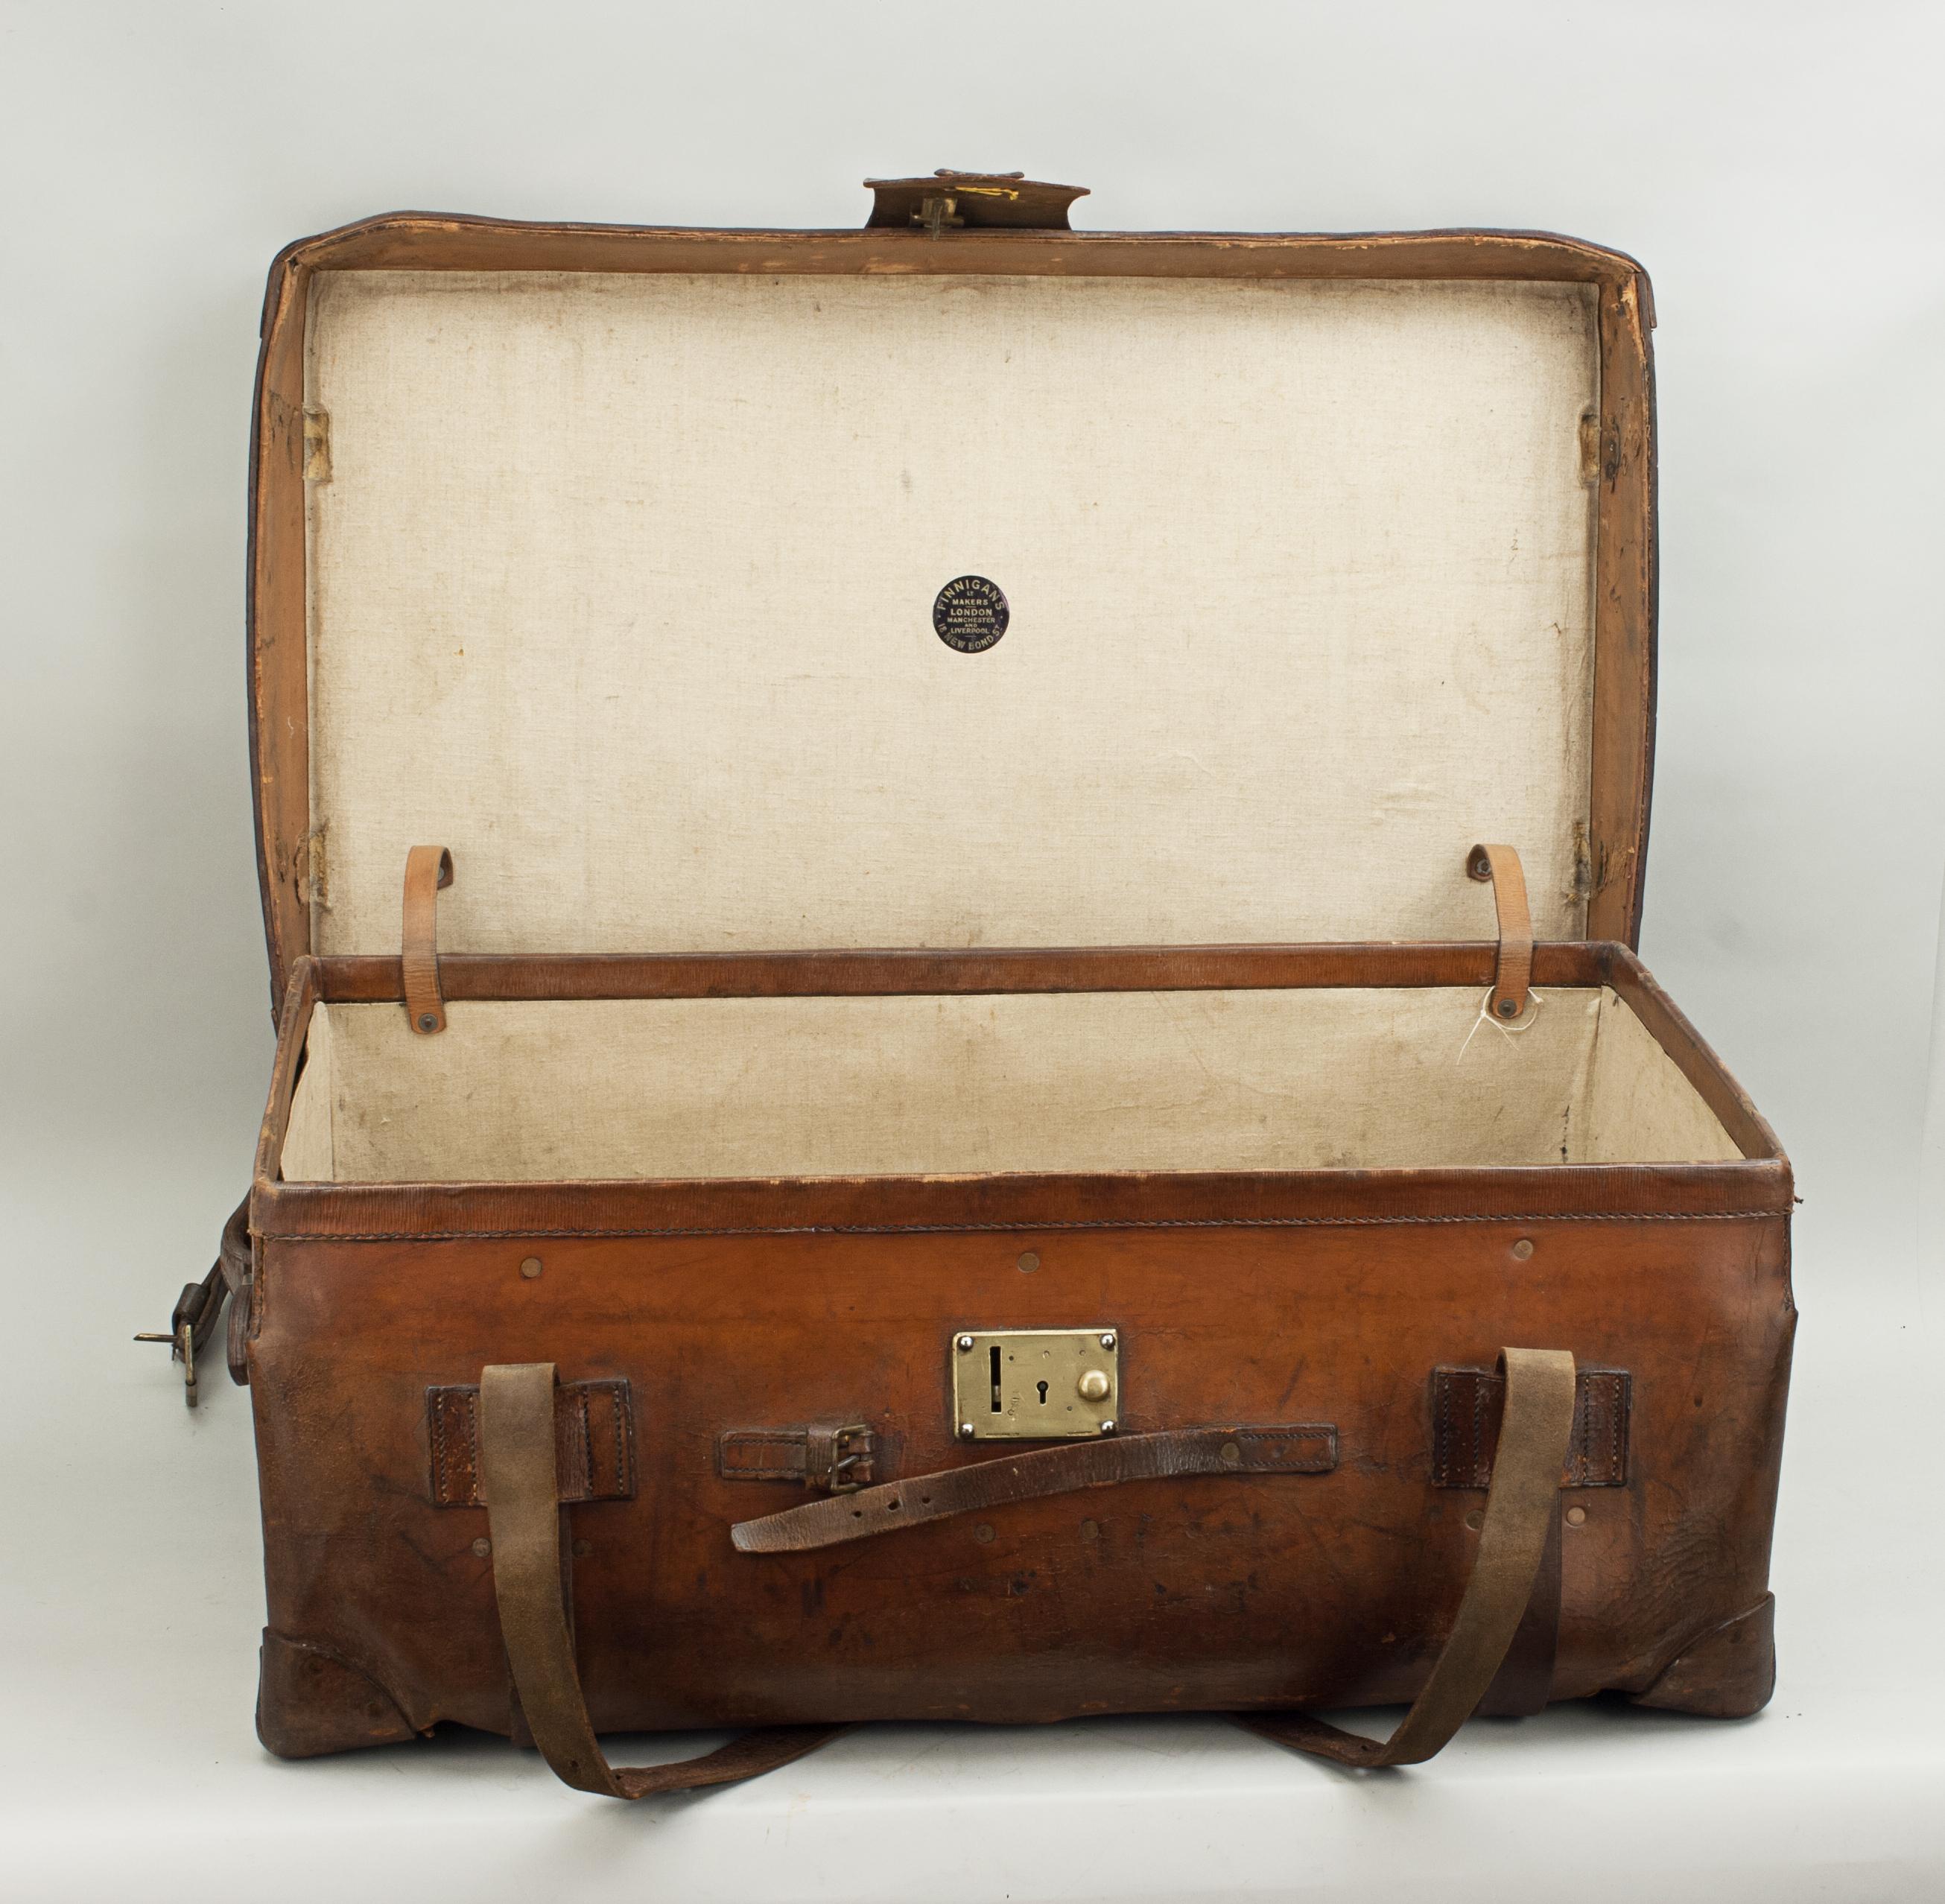 Antique Leather Trunk by Finnigans, Bond Street, London Luggage 1